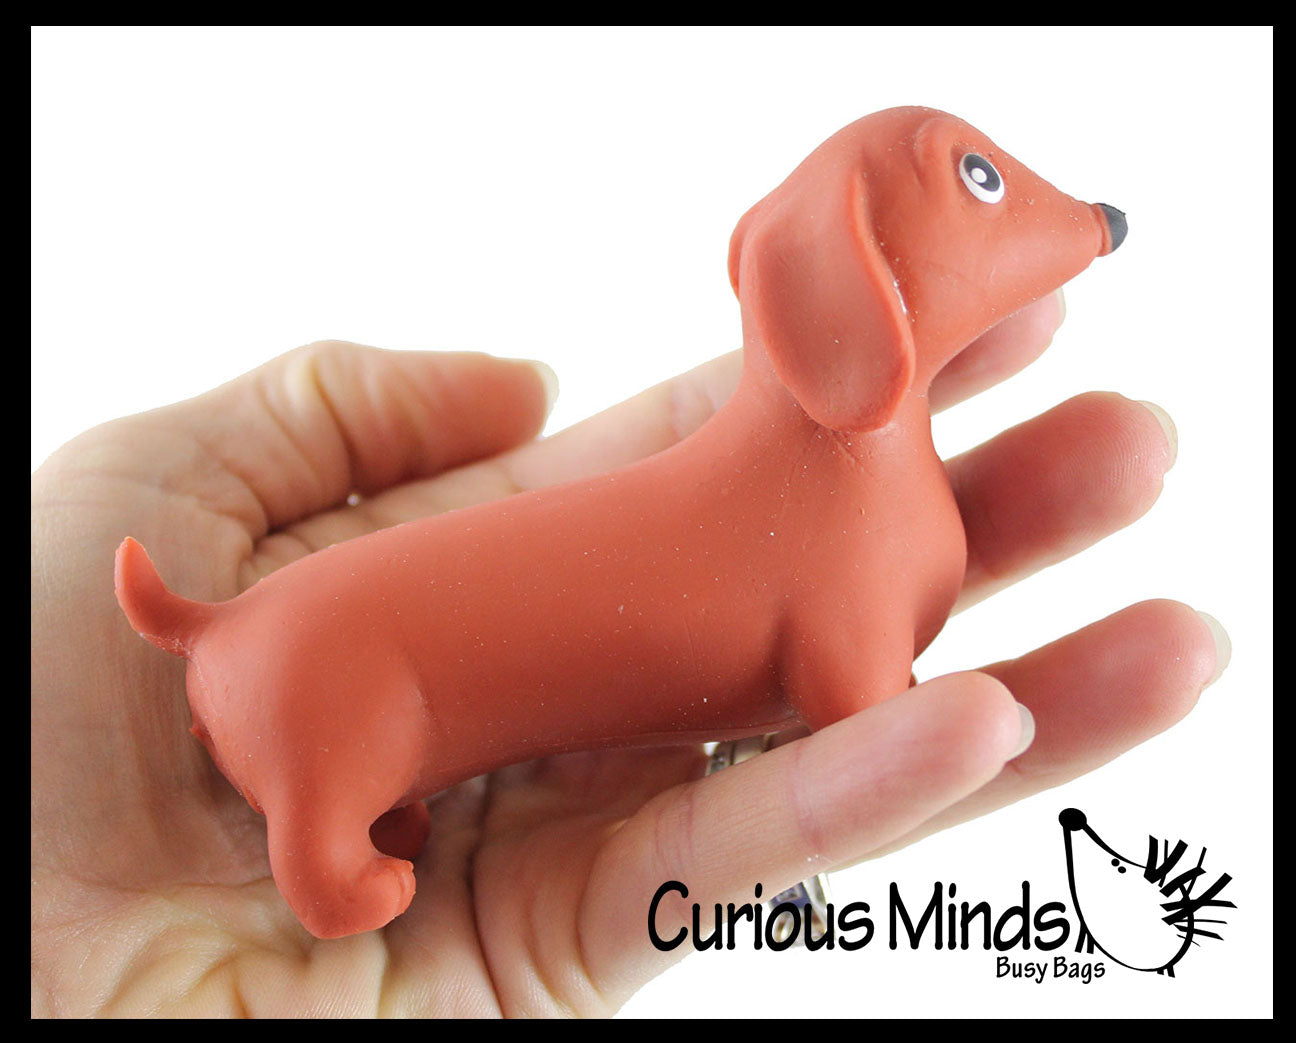 Curious Minds Busy Bags Set of 3 Different Breed Stretchy Dogs - Corgi,  Dachshund, and Bulldog - Crushed Bead Sand Filled - Doggy Lover Sensory  Fidget